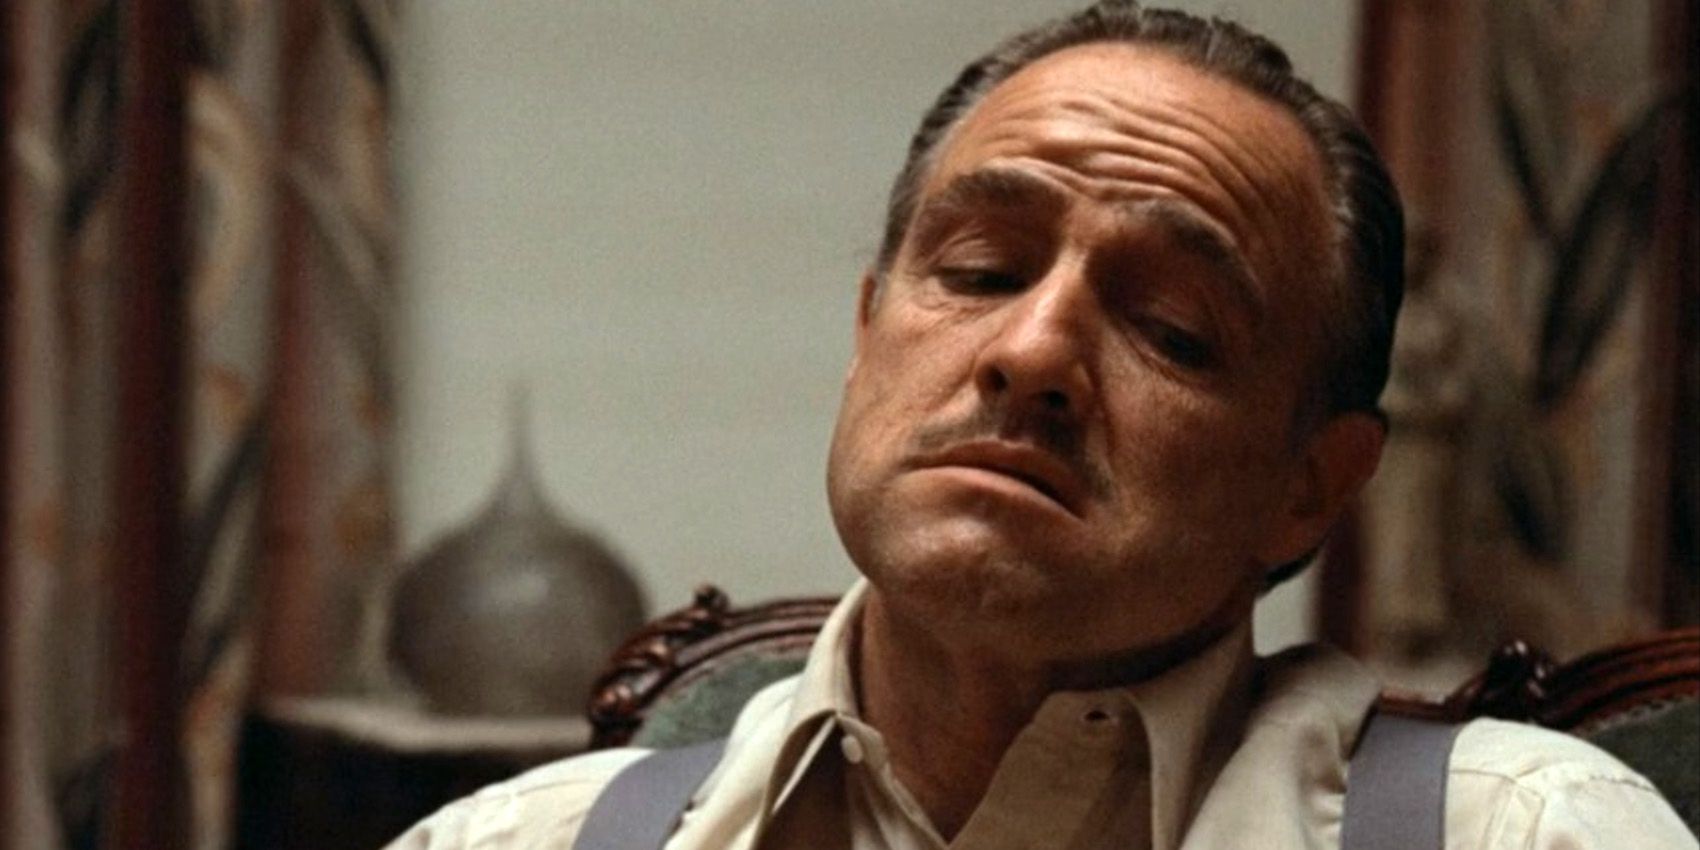 How Old Marlon Brando Was In The Godfather (Compared To Don Corleone)